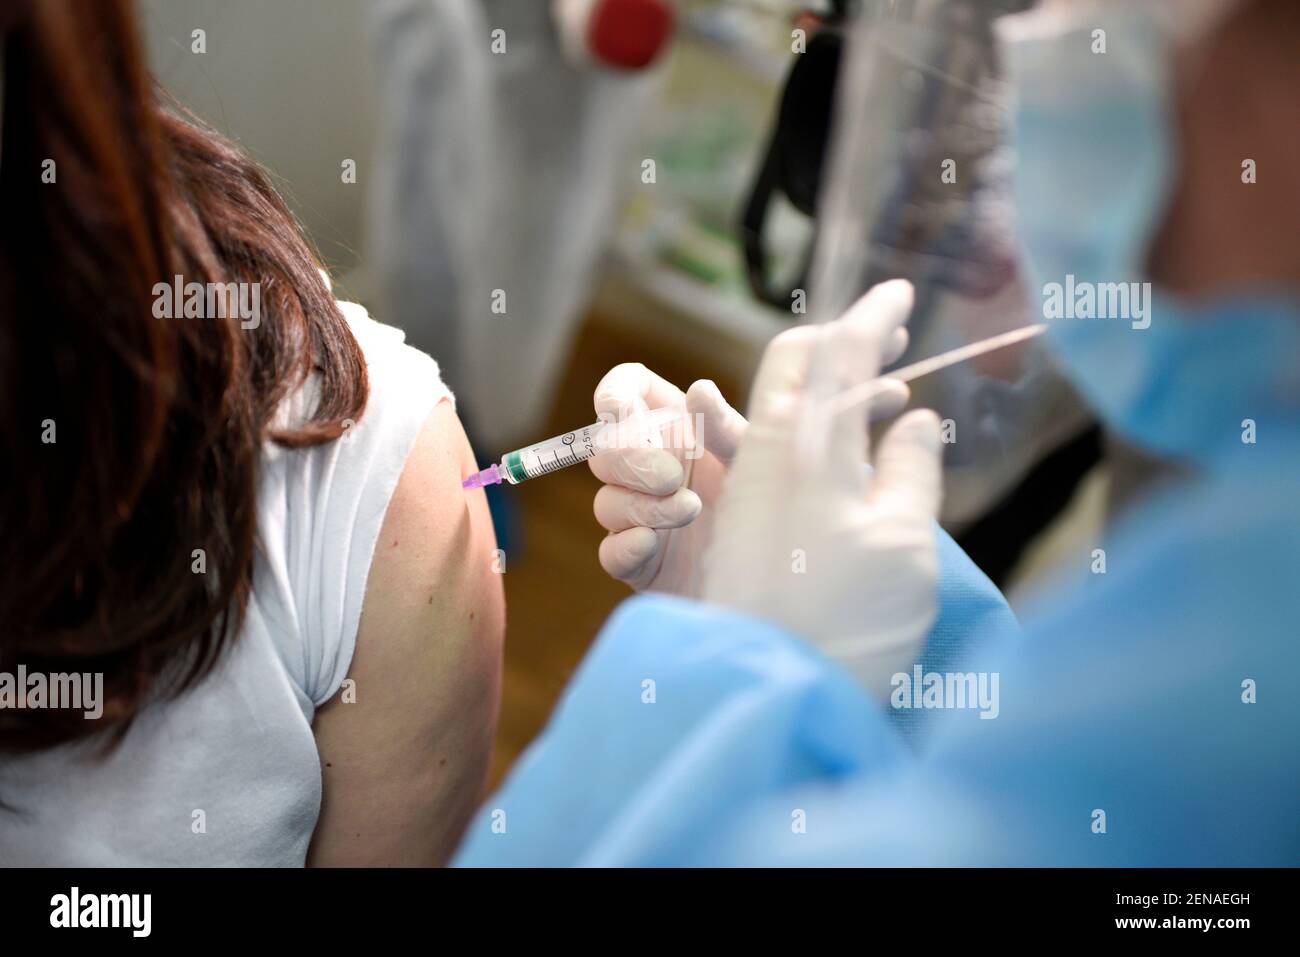 LVIV, UKRAINE - FEBRUARY 25, 2021 - A medical worker is being vaccinated with Oxford/AstraZeneca (Covishield) anti-coronavirus vaccine at the Lviv Regional Clinical Infectious Diseases Hospital, Lviv, western Ukraine. Credit: Ukrinform/Alamy Live News Stock Photo